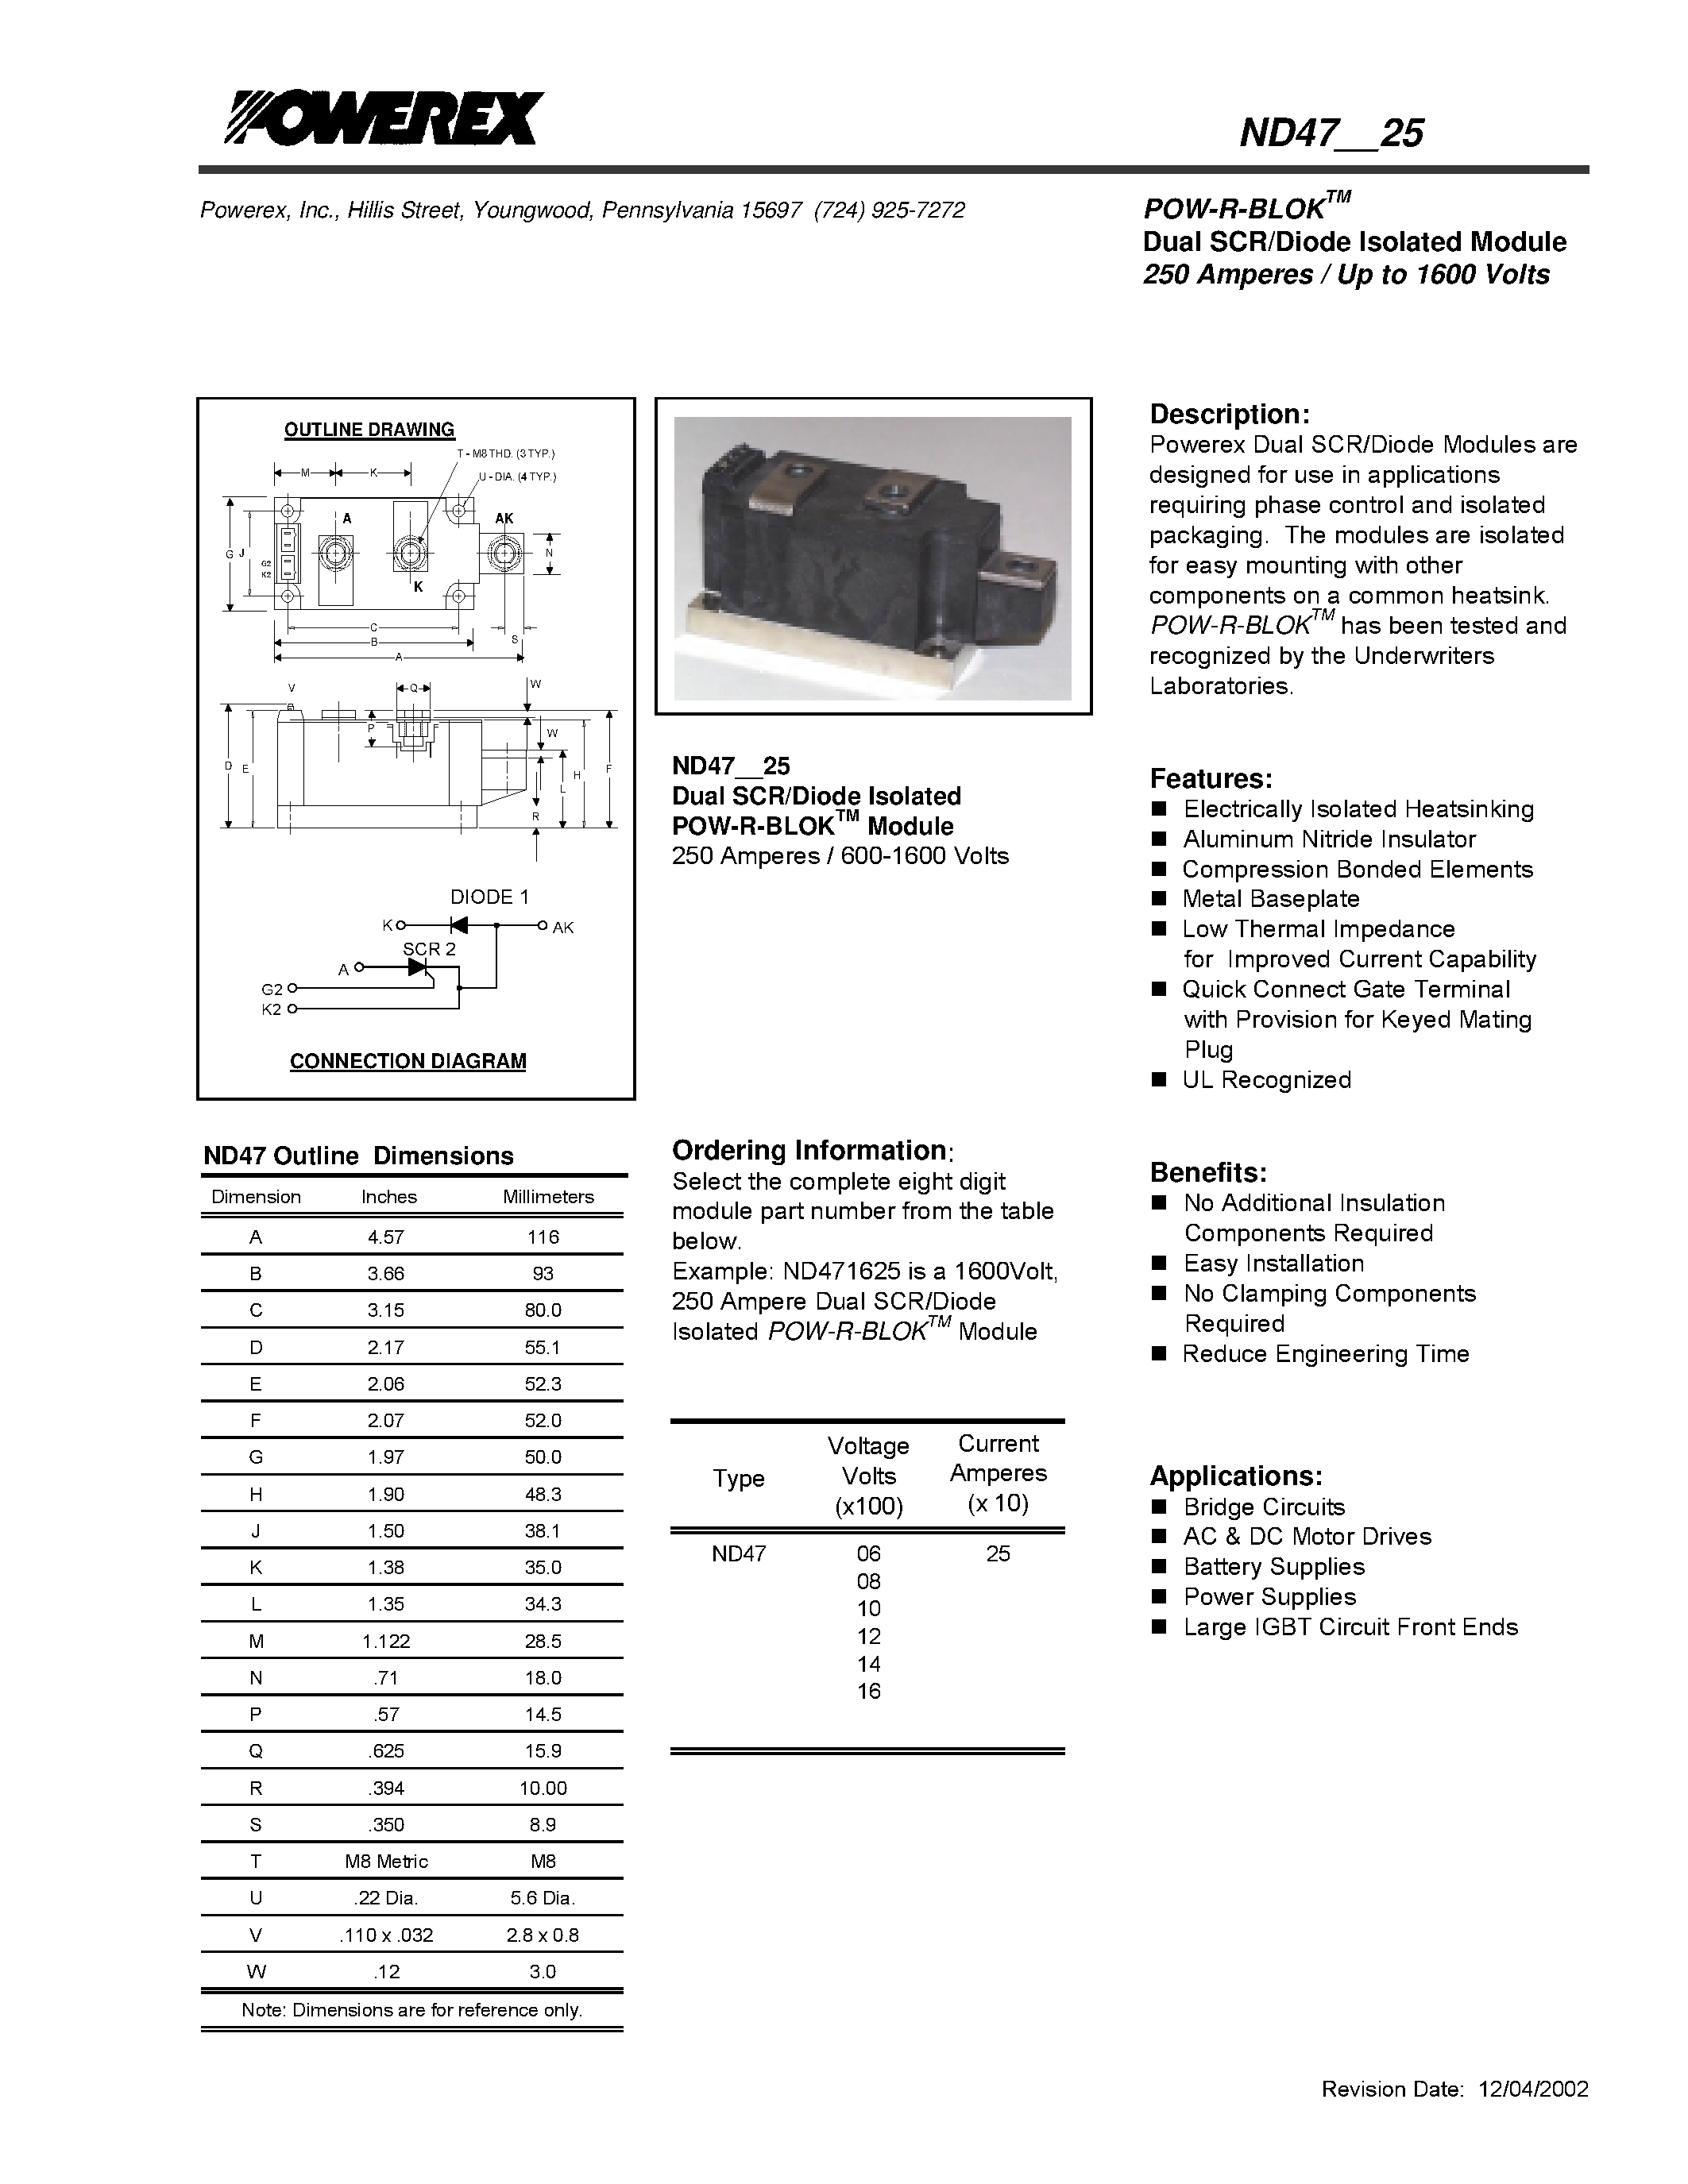 Datasheet ND471225 - POW-R-BLOK Dual SCR/Diode Isolated Module (250 Amperes / Up to 1600 Volts) page 1